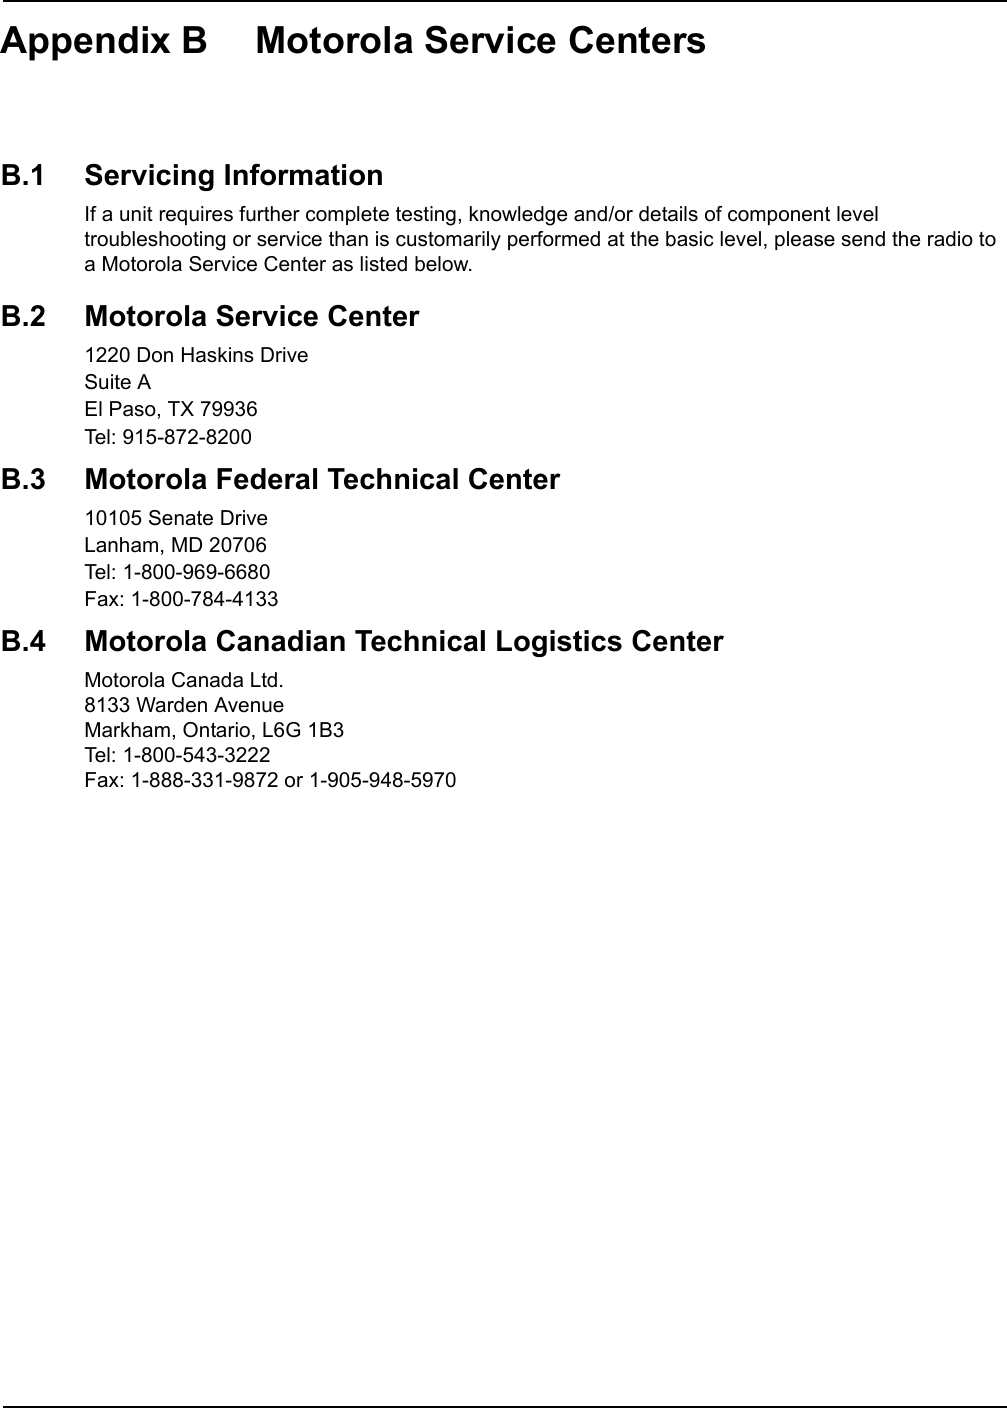 Appendix B Motorola Service CentersB.1 Servicing InformationIf a unit requires further complete testing, knowledge and/or details of component level troubleshooting or service than is customarily performed at the basic level, please send the radio to a Motorola Service Center as listed below.B.2 Motorola Service Center1220 Don Haskins DriveSuite AEl Paso, TX 79936Tel: 915-872-8200B.3 Motorola Federal Technical Center10105 Senate DriveLanham, MD 20706Tel: 1-800-969-6680Fax: 1-800-784-4133B.4 Motorola Canadian Technical Logistics CenterMotorola Canada Ltd. 8133 Warden Avenue Markham, Ontario, L6G 1B3 Tel: 1-800-543-3222 Fax: 1-888-331-9872 or 1-905-948-5970